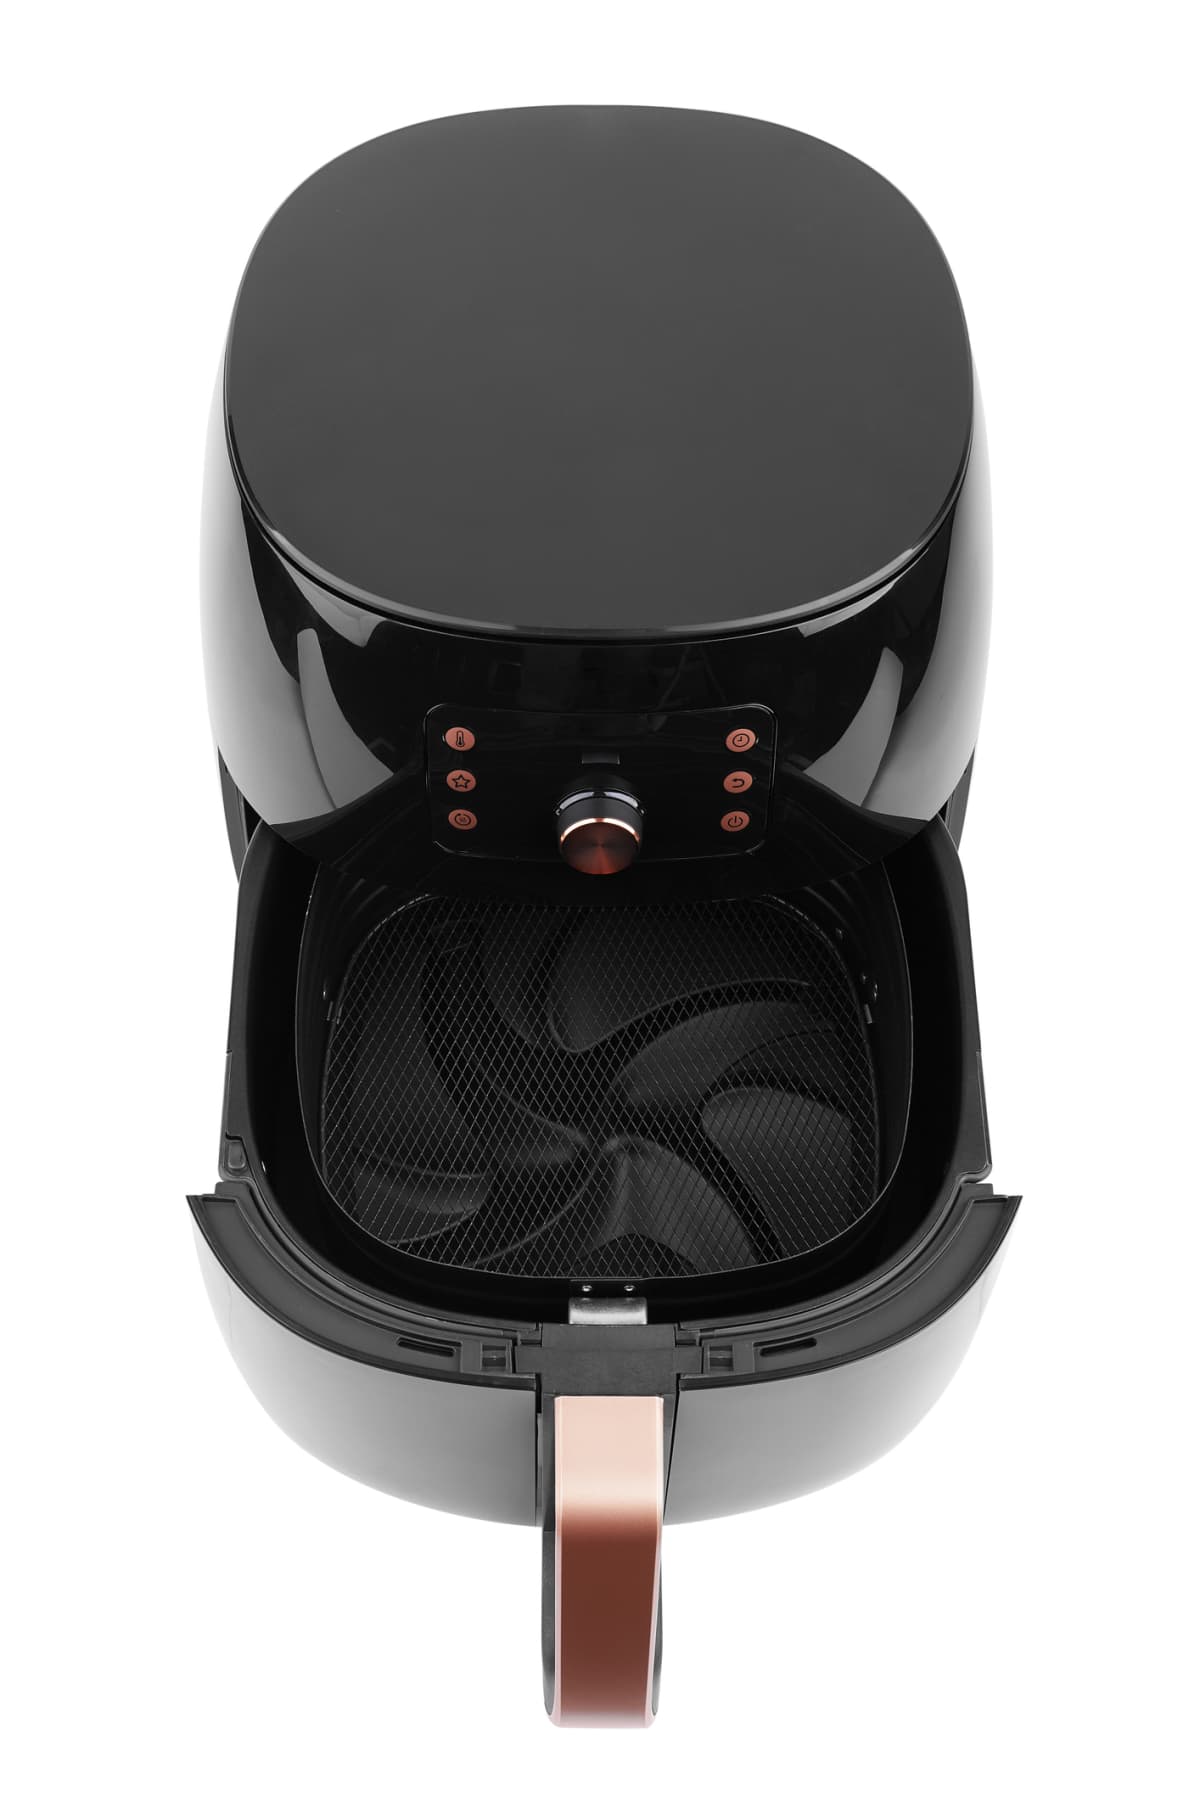 An opened air fryer on a white background